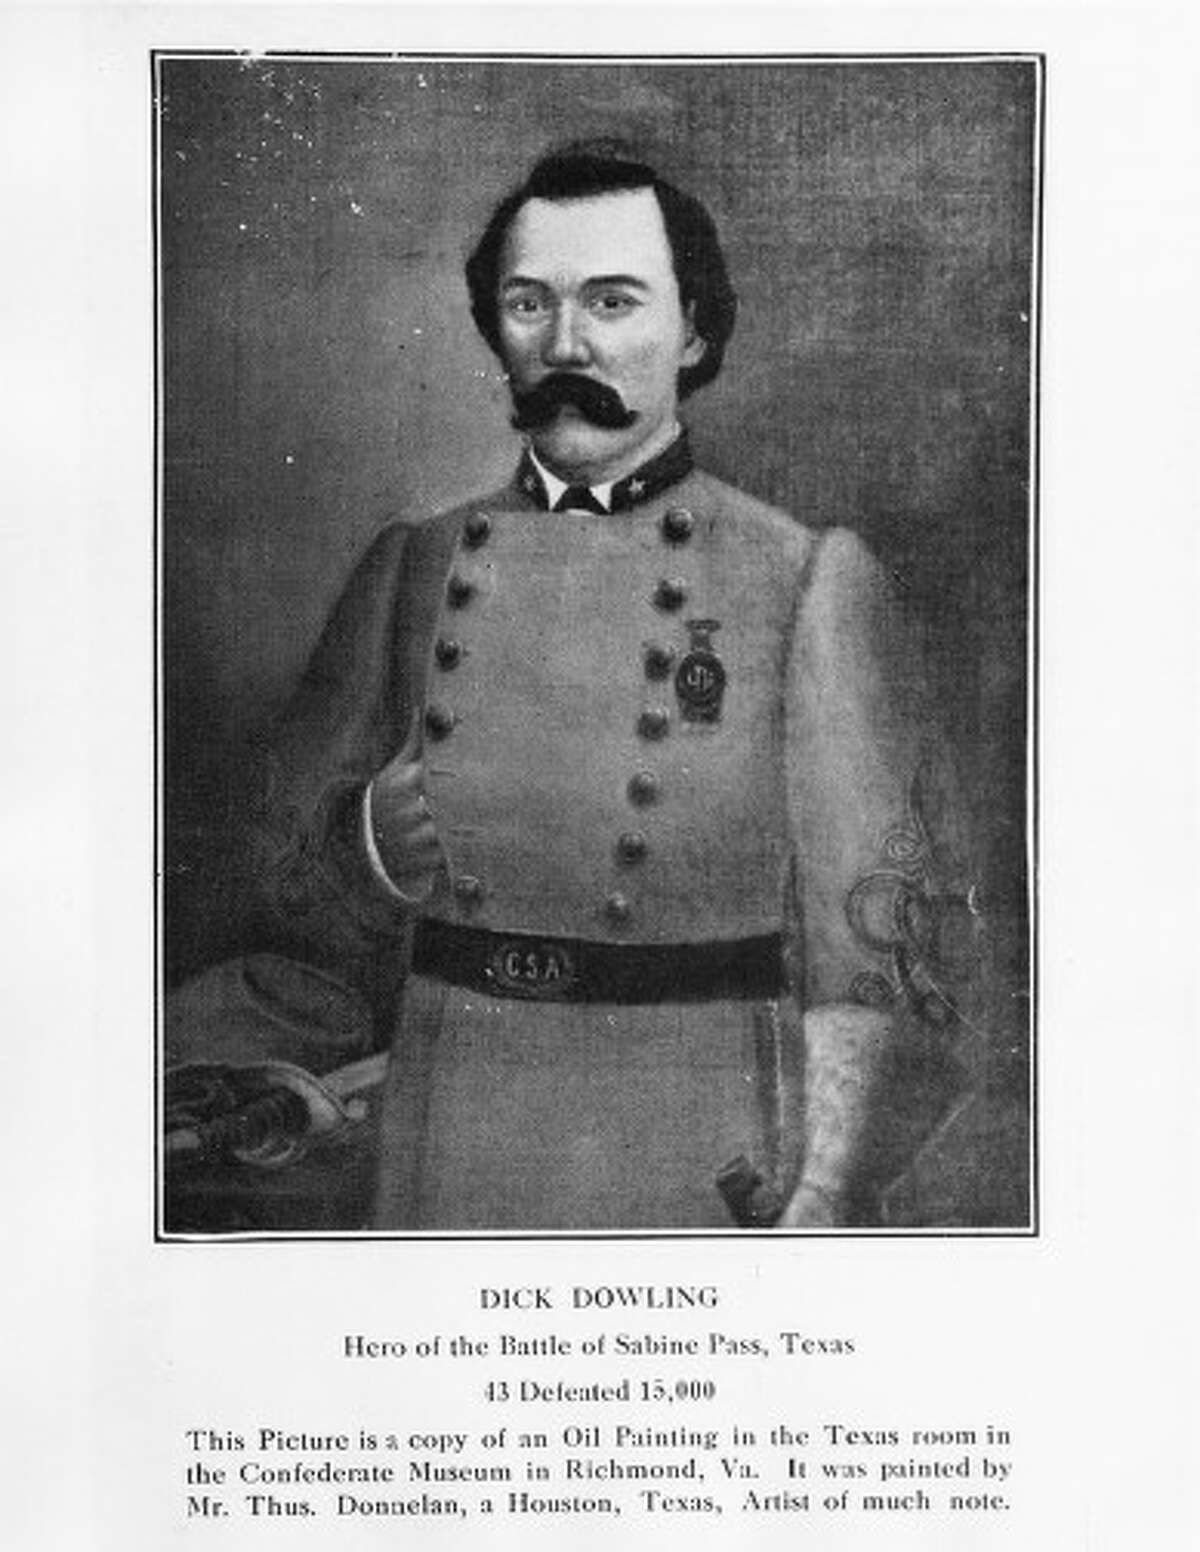 Dowling Middle School was named after Richard Dowling, a Confederate army officer. According to the most recent data from the 2013-14 school year, the school is now 57.7 percent Hispanic, 40.3 percent African American, 0.4 percent Asian, and 1.1 percent white.